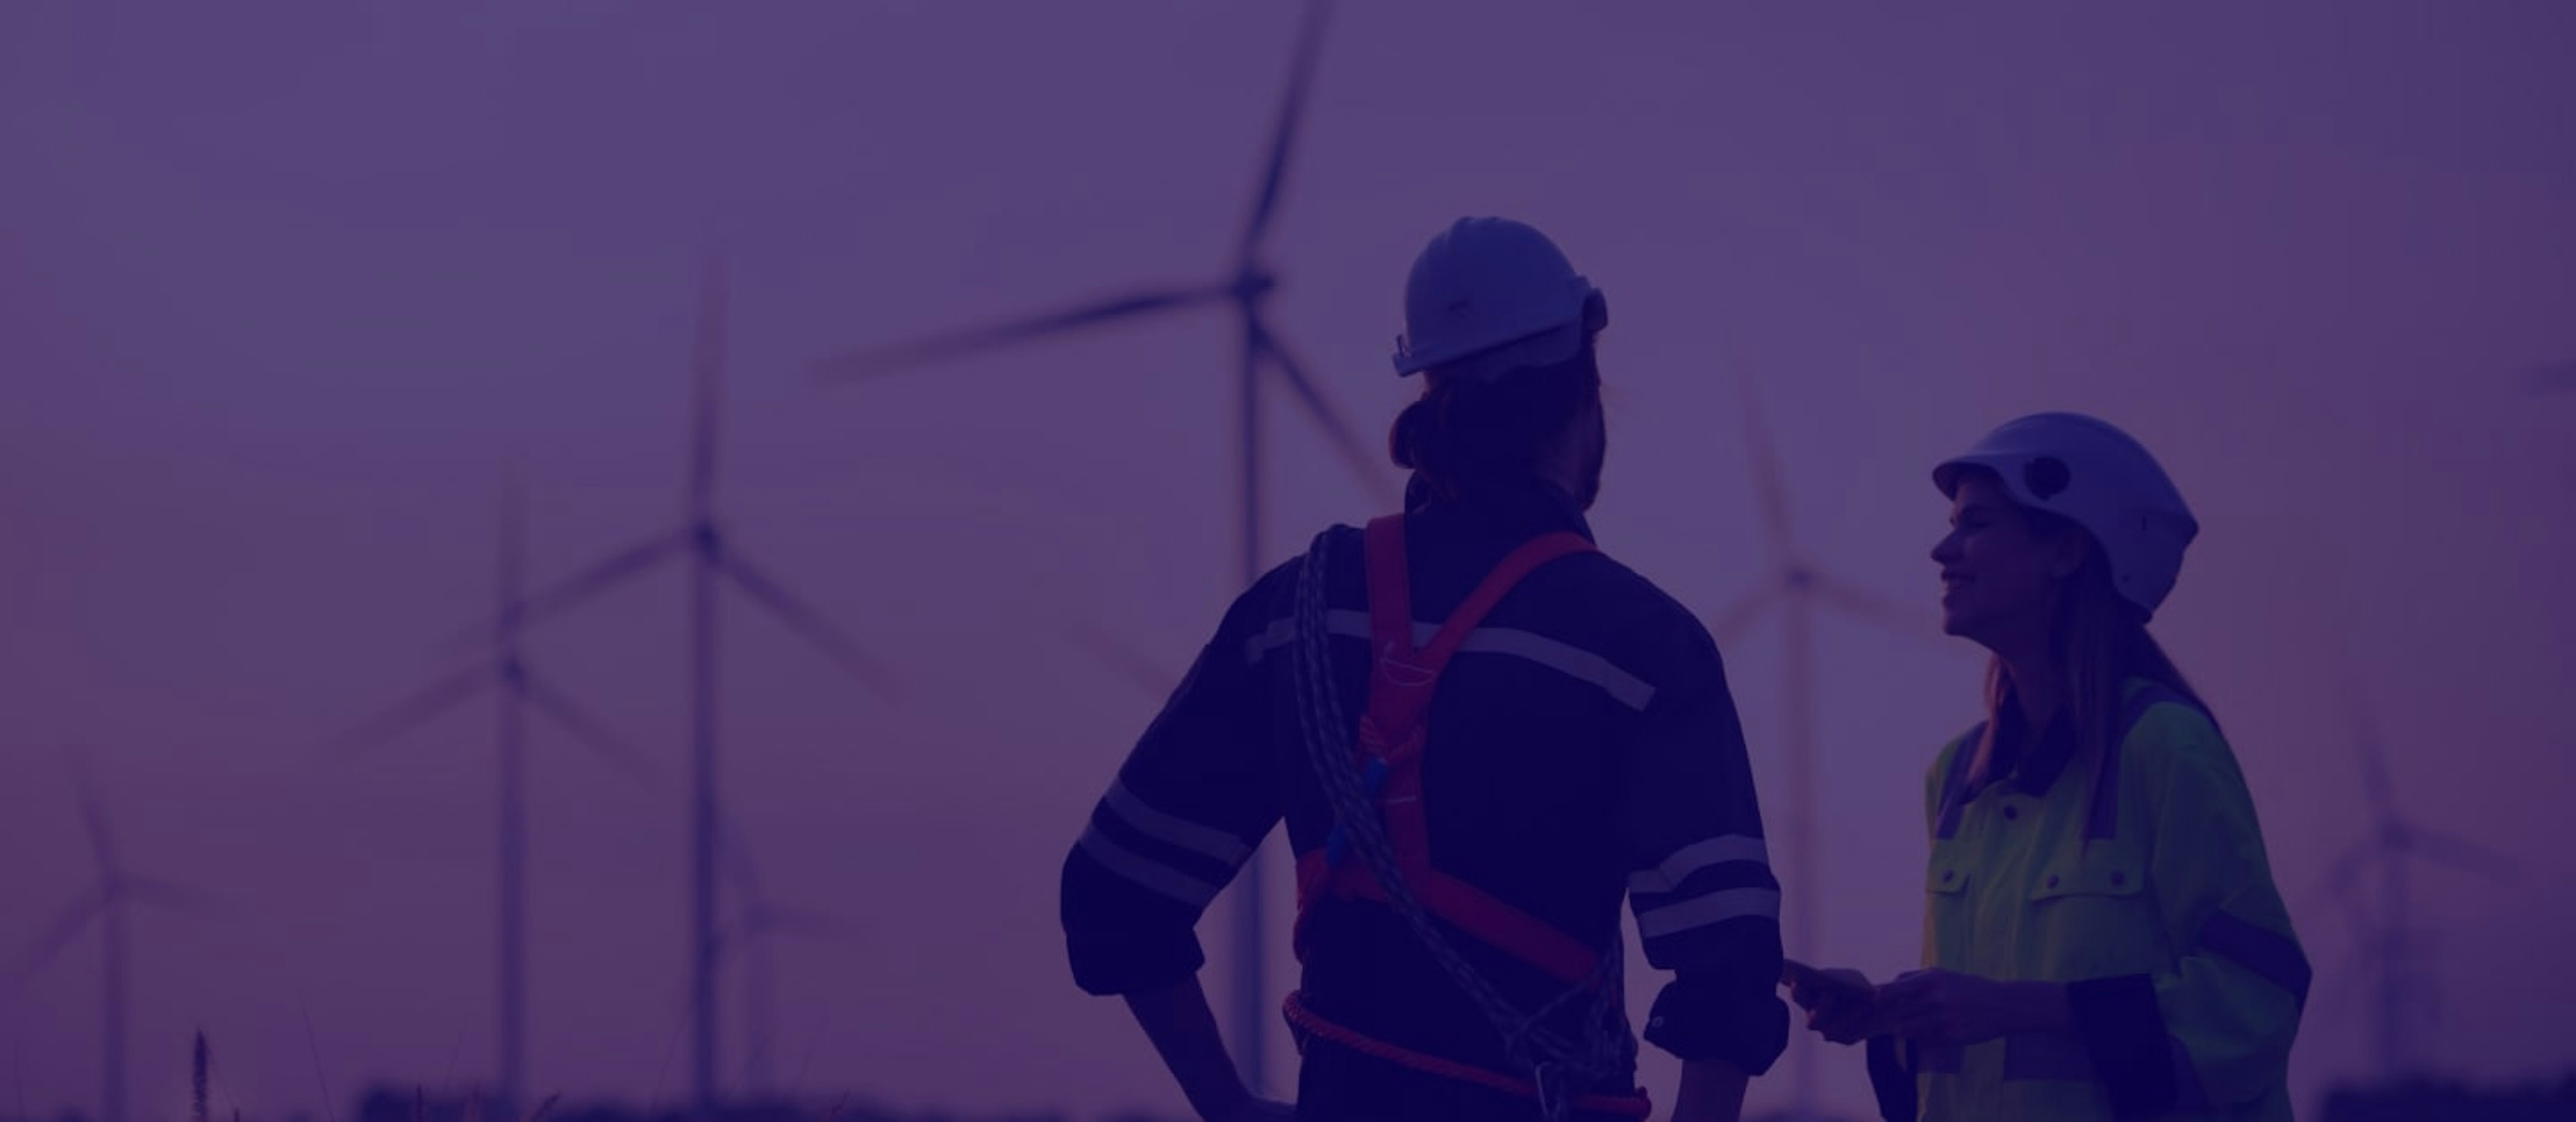 Image of workers on a wind farm